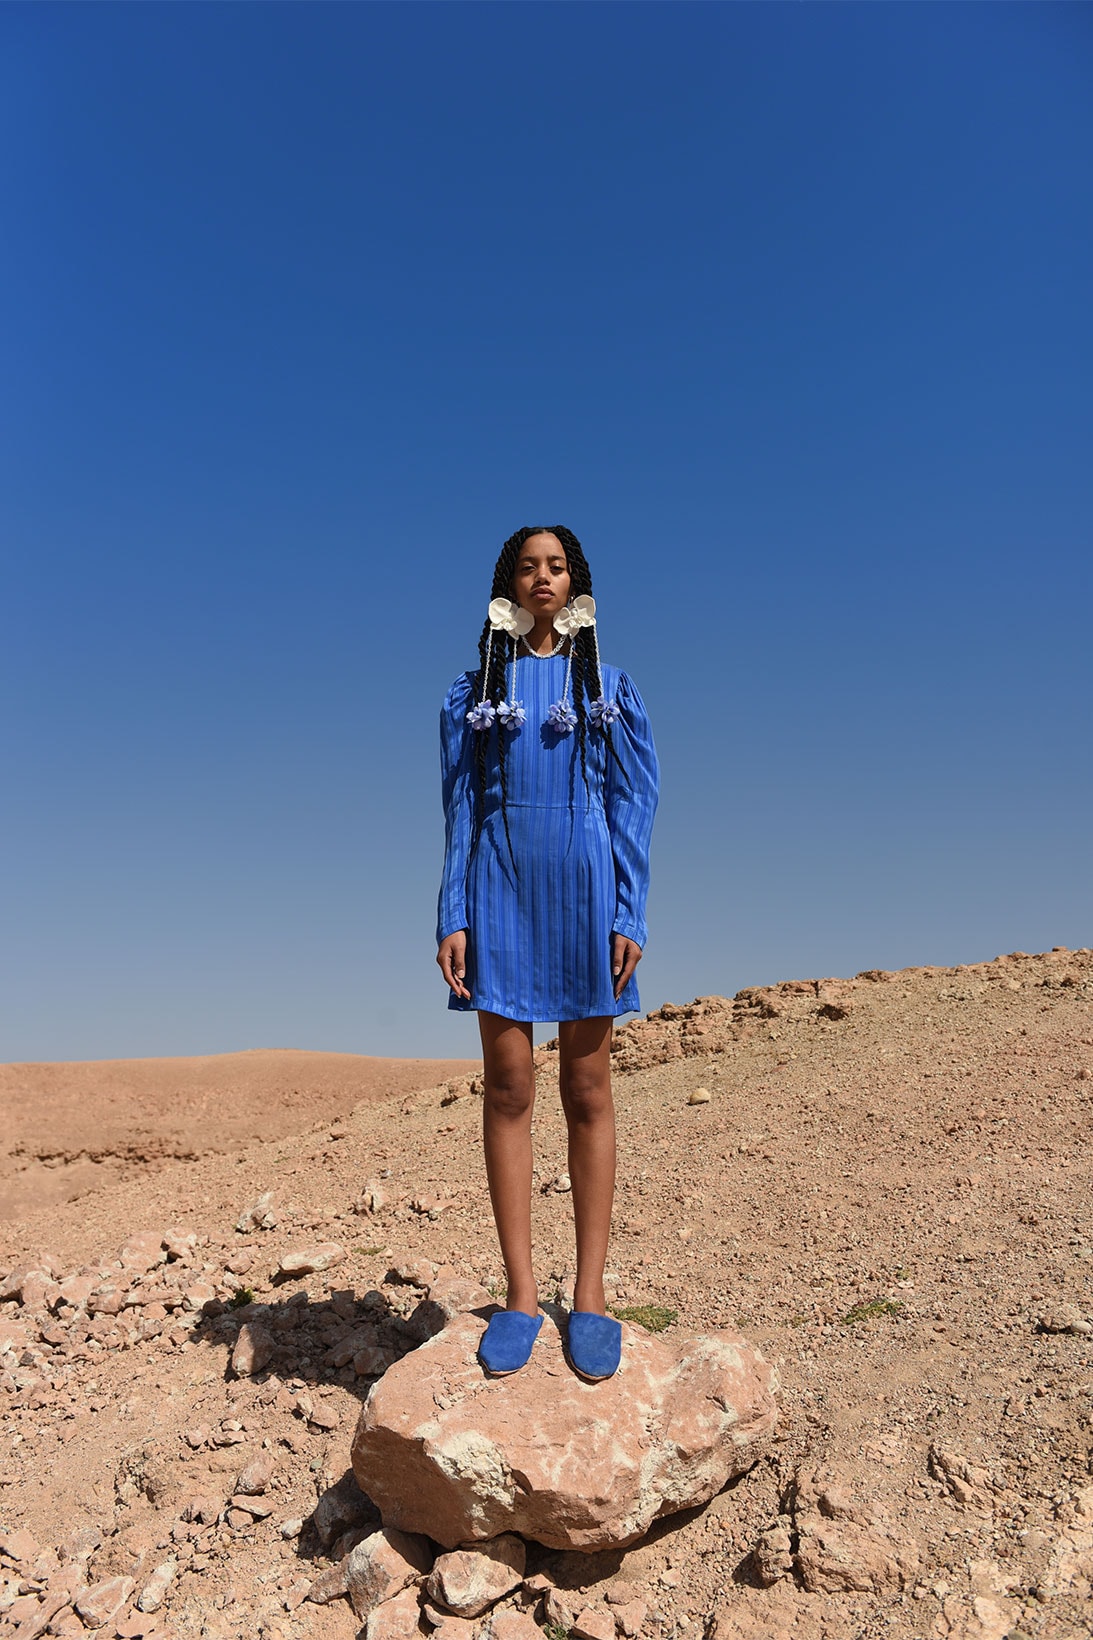 Les Benjamins Spring Summer Campaign "The Mystic Journey" Marrakesh Morocco Images